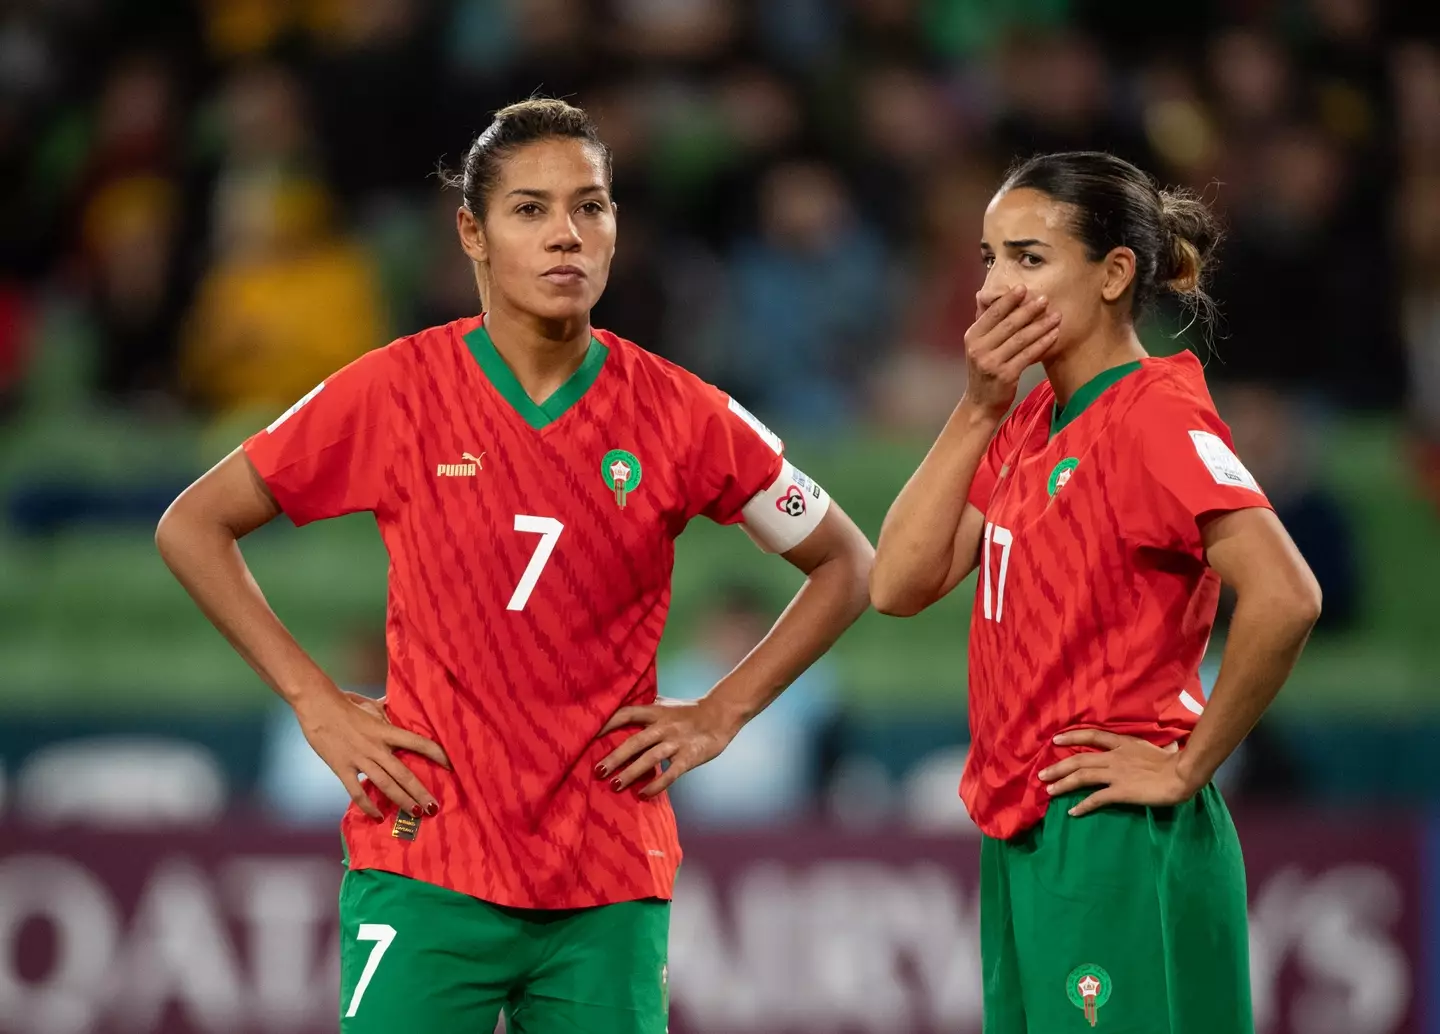 Morocco took on Germany in the FIFA Women's World Cup yesterday (Monday, 24 July).